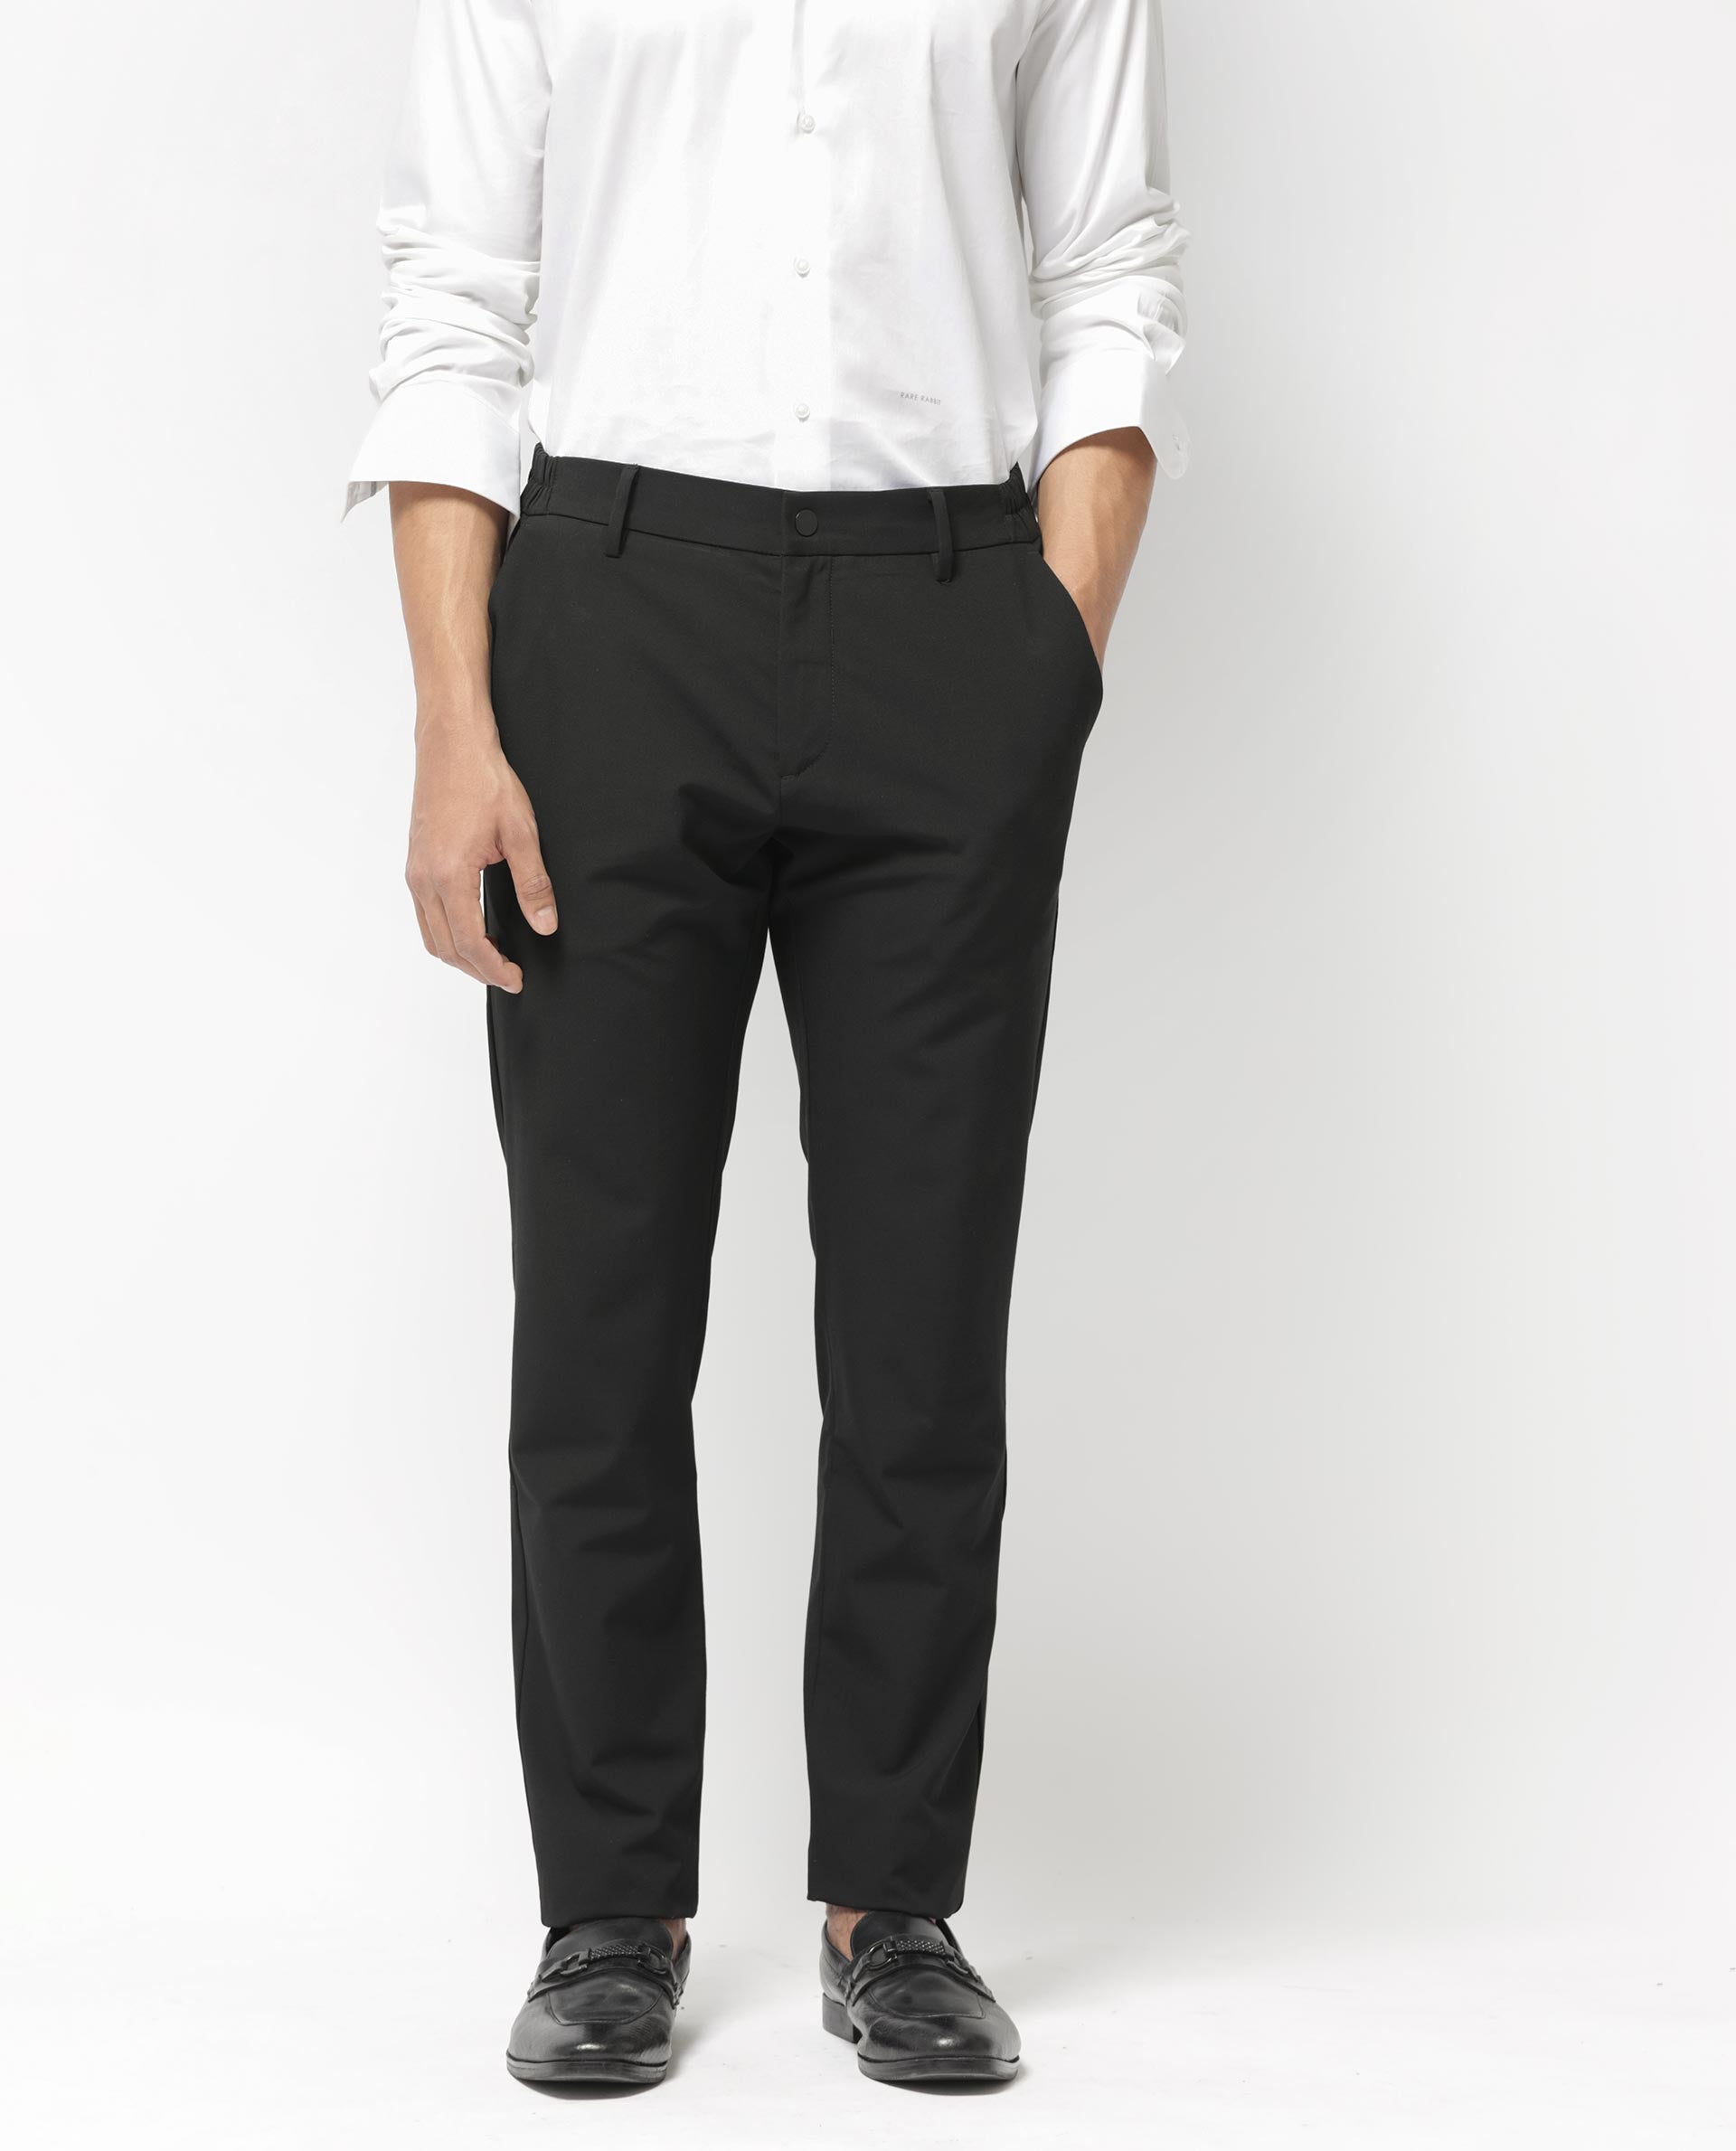 Poly viscose Black Men's Corporate Pant at Rs 499/piece in Coimbatore | ID:  2850300853755